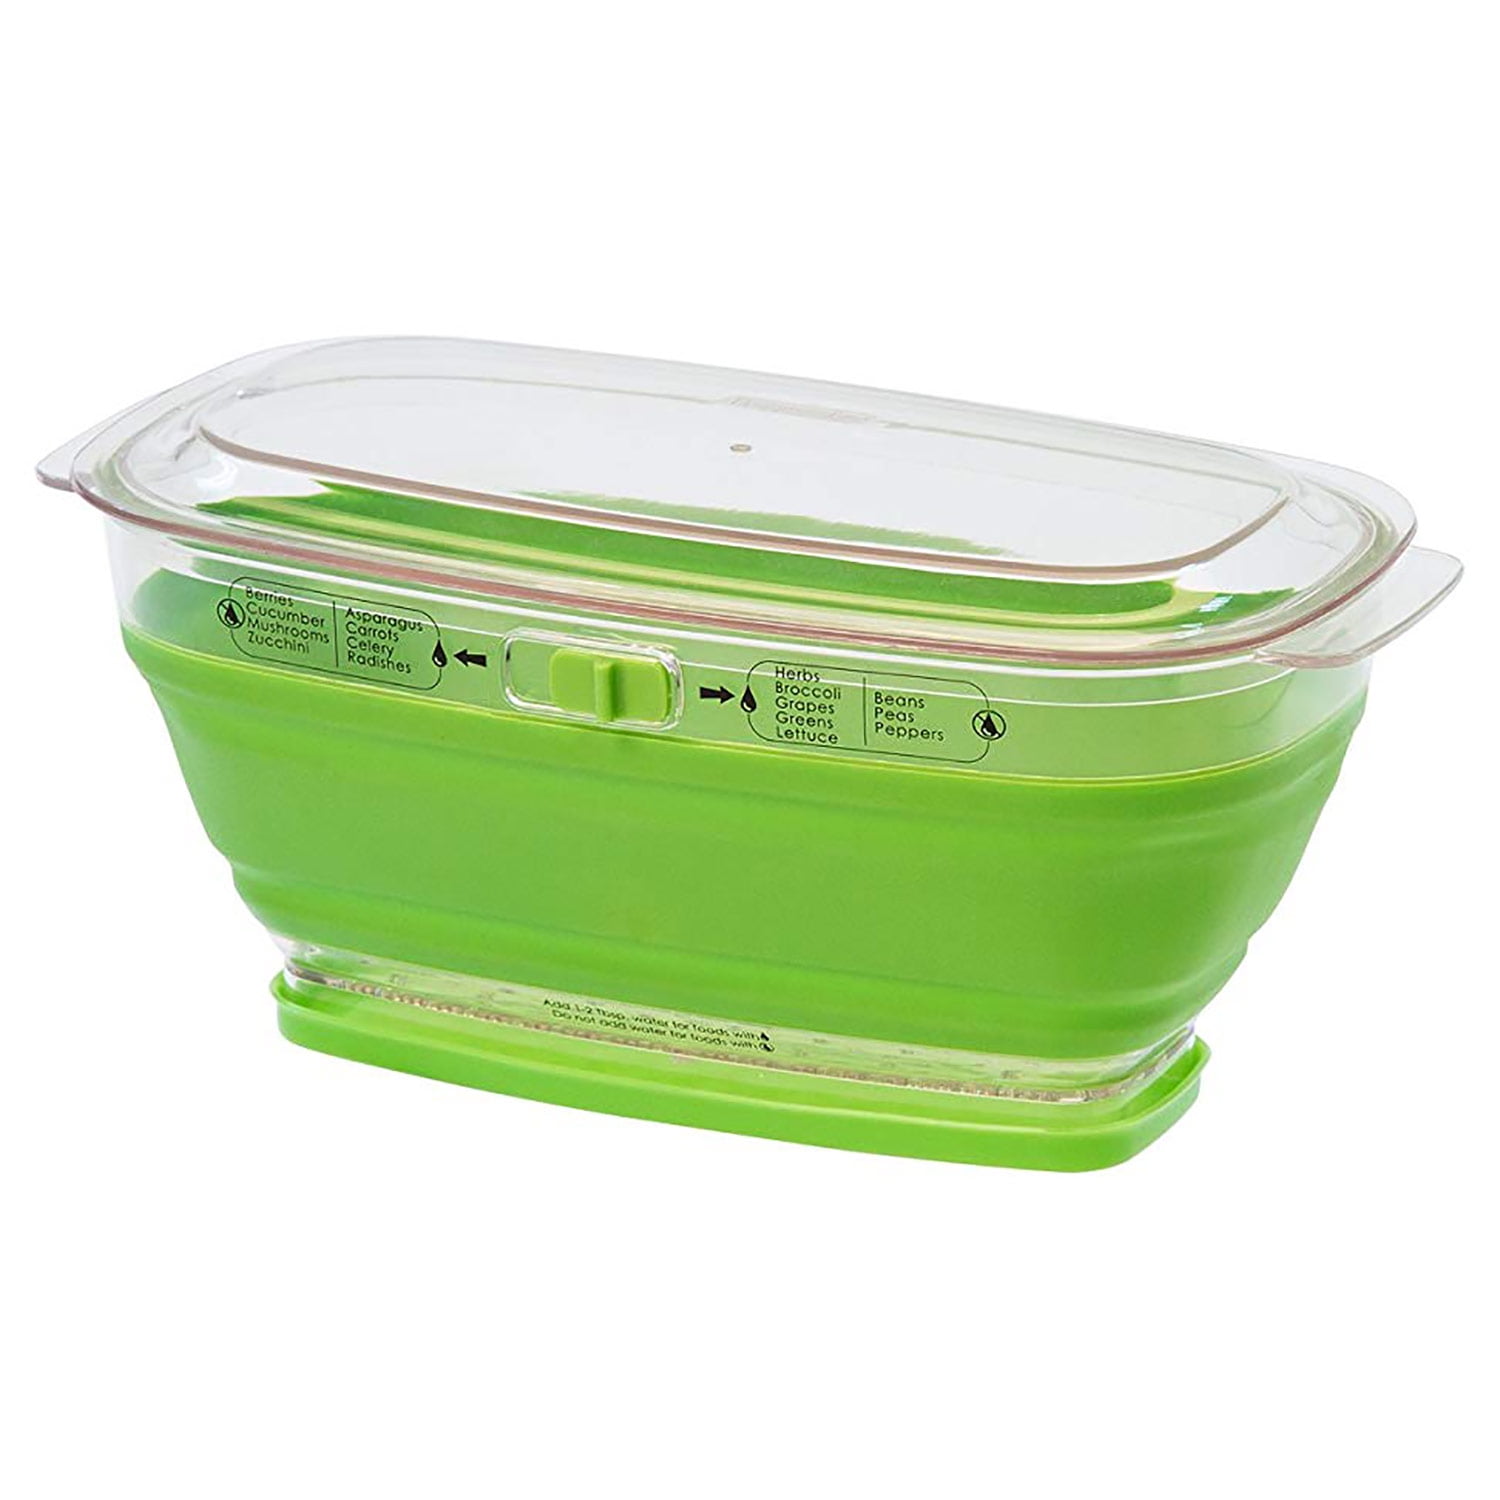 Goodful Produce Keeper, Adjustable Air Vents, Removable Insert/Colander, Durable Food Safe Material, Stackable, Clear and Green, Large 11.6 x 8 x